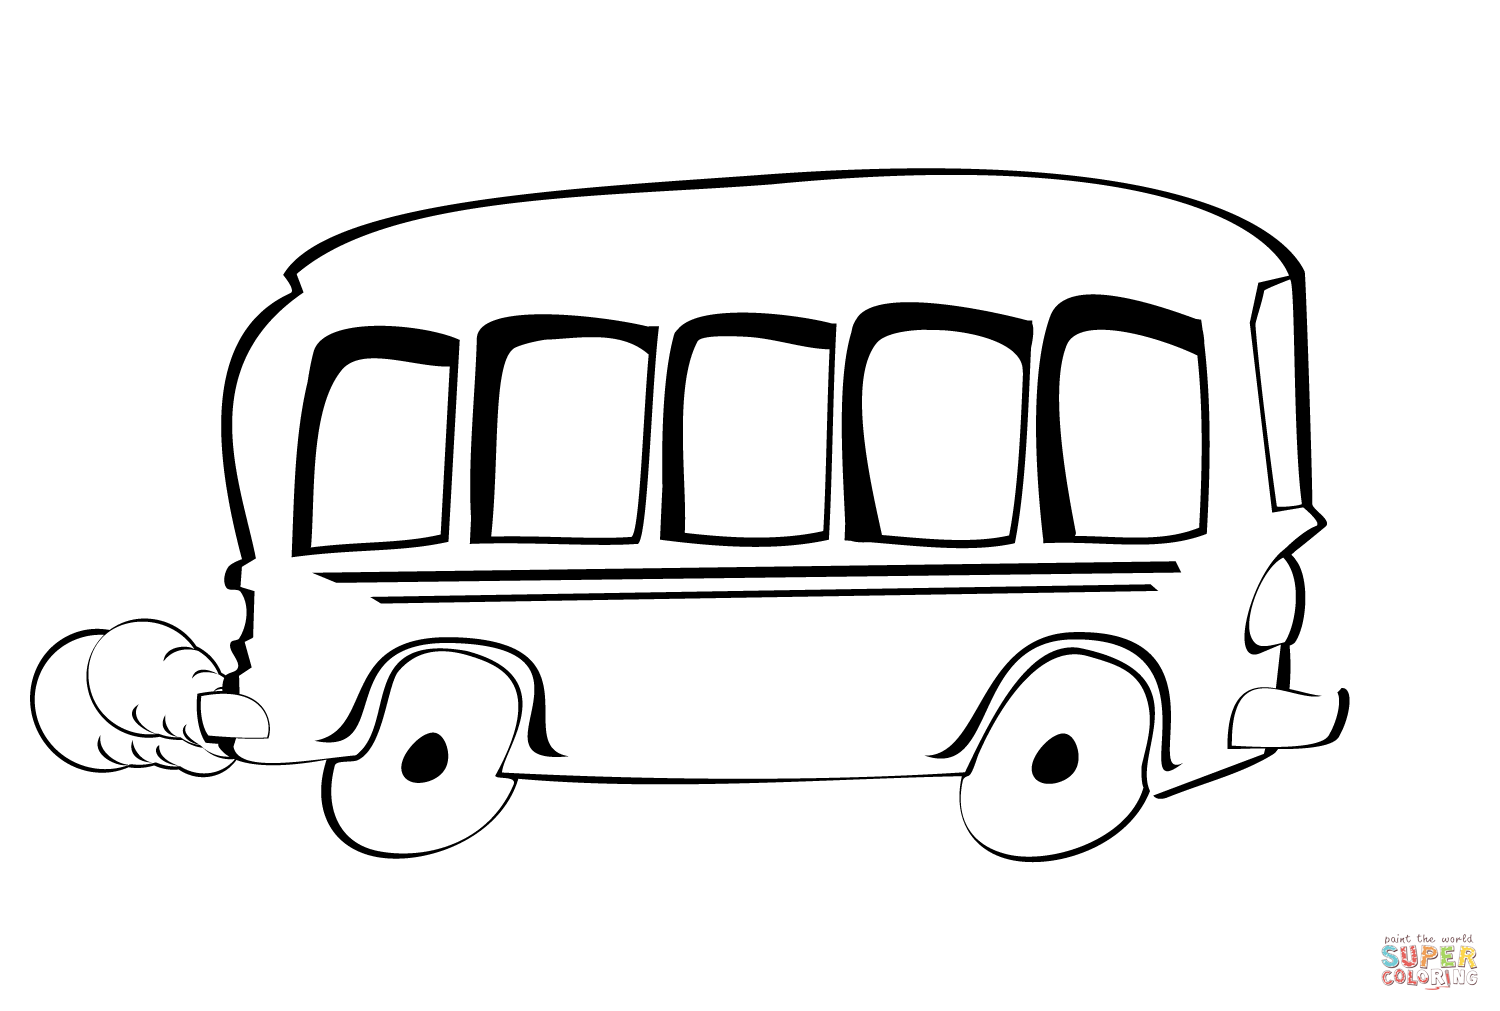 Cartoon Bus coloring page | Free Printable Coloring Pages